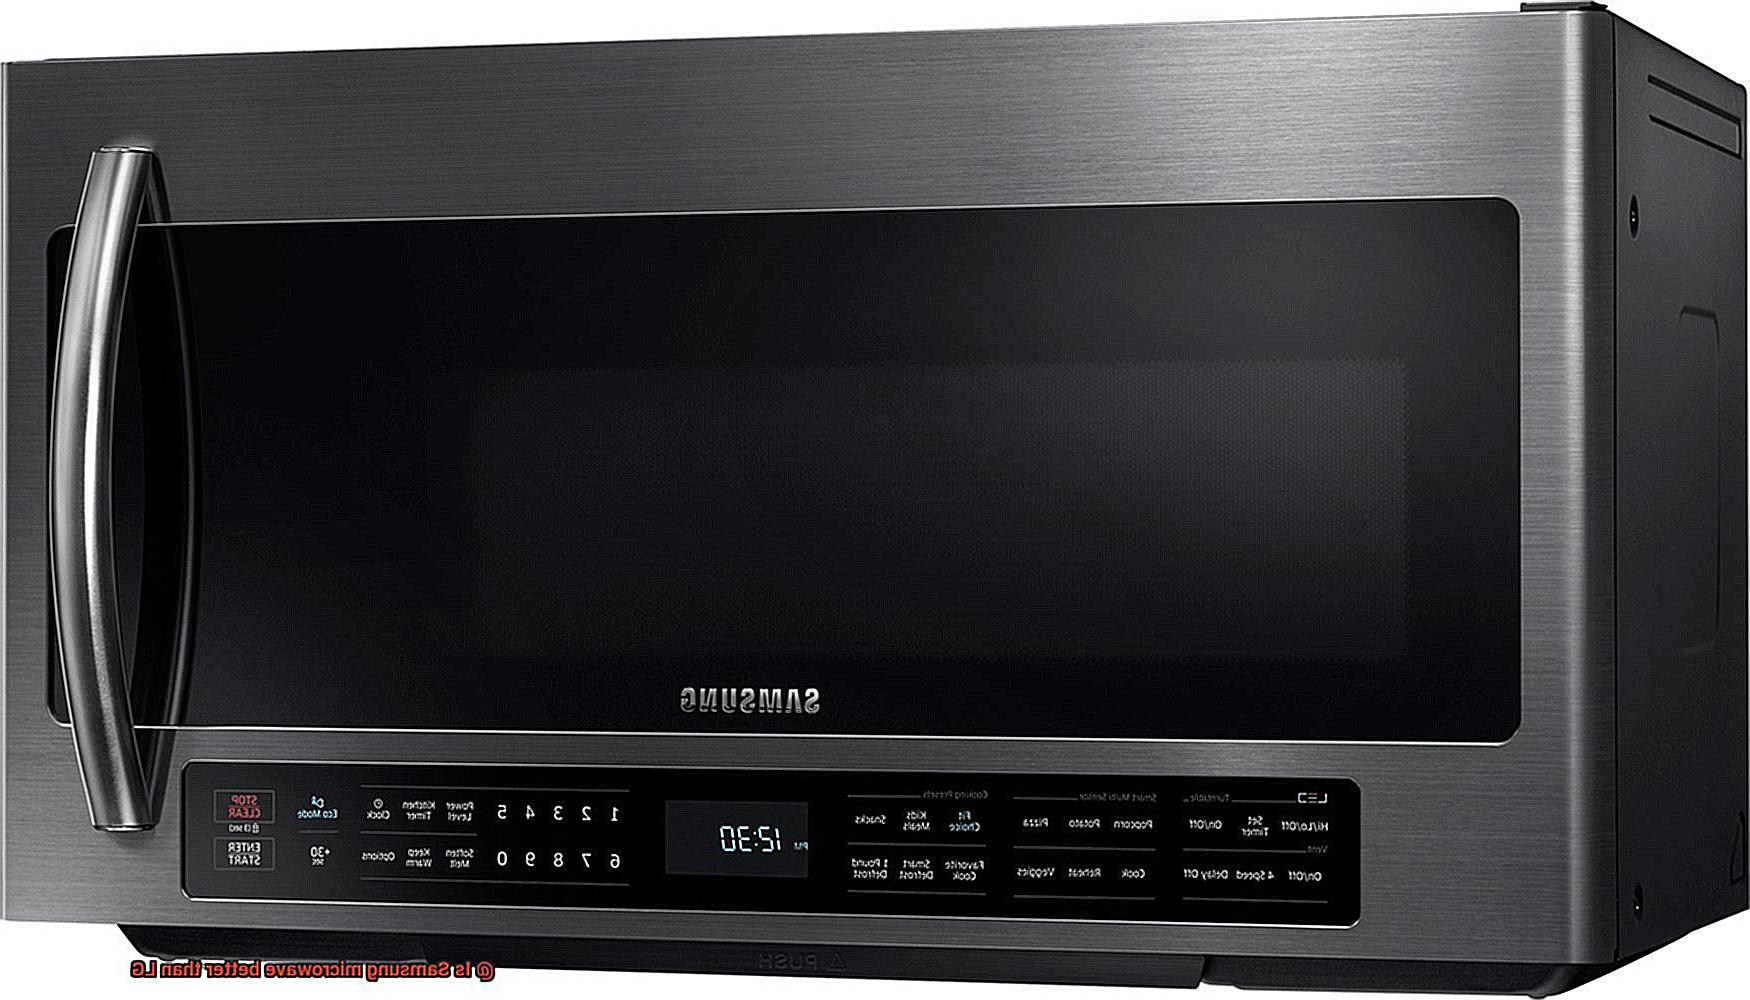 Is Samsung microwave better than LG-6